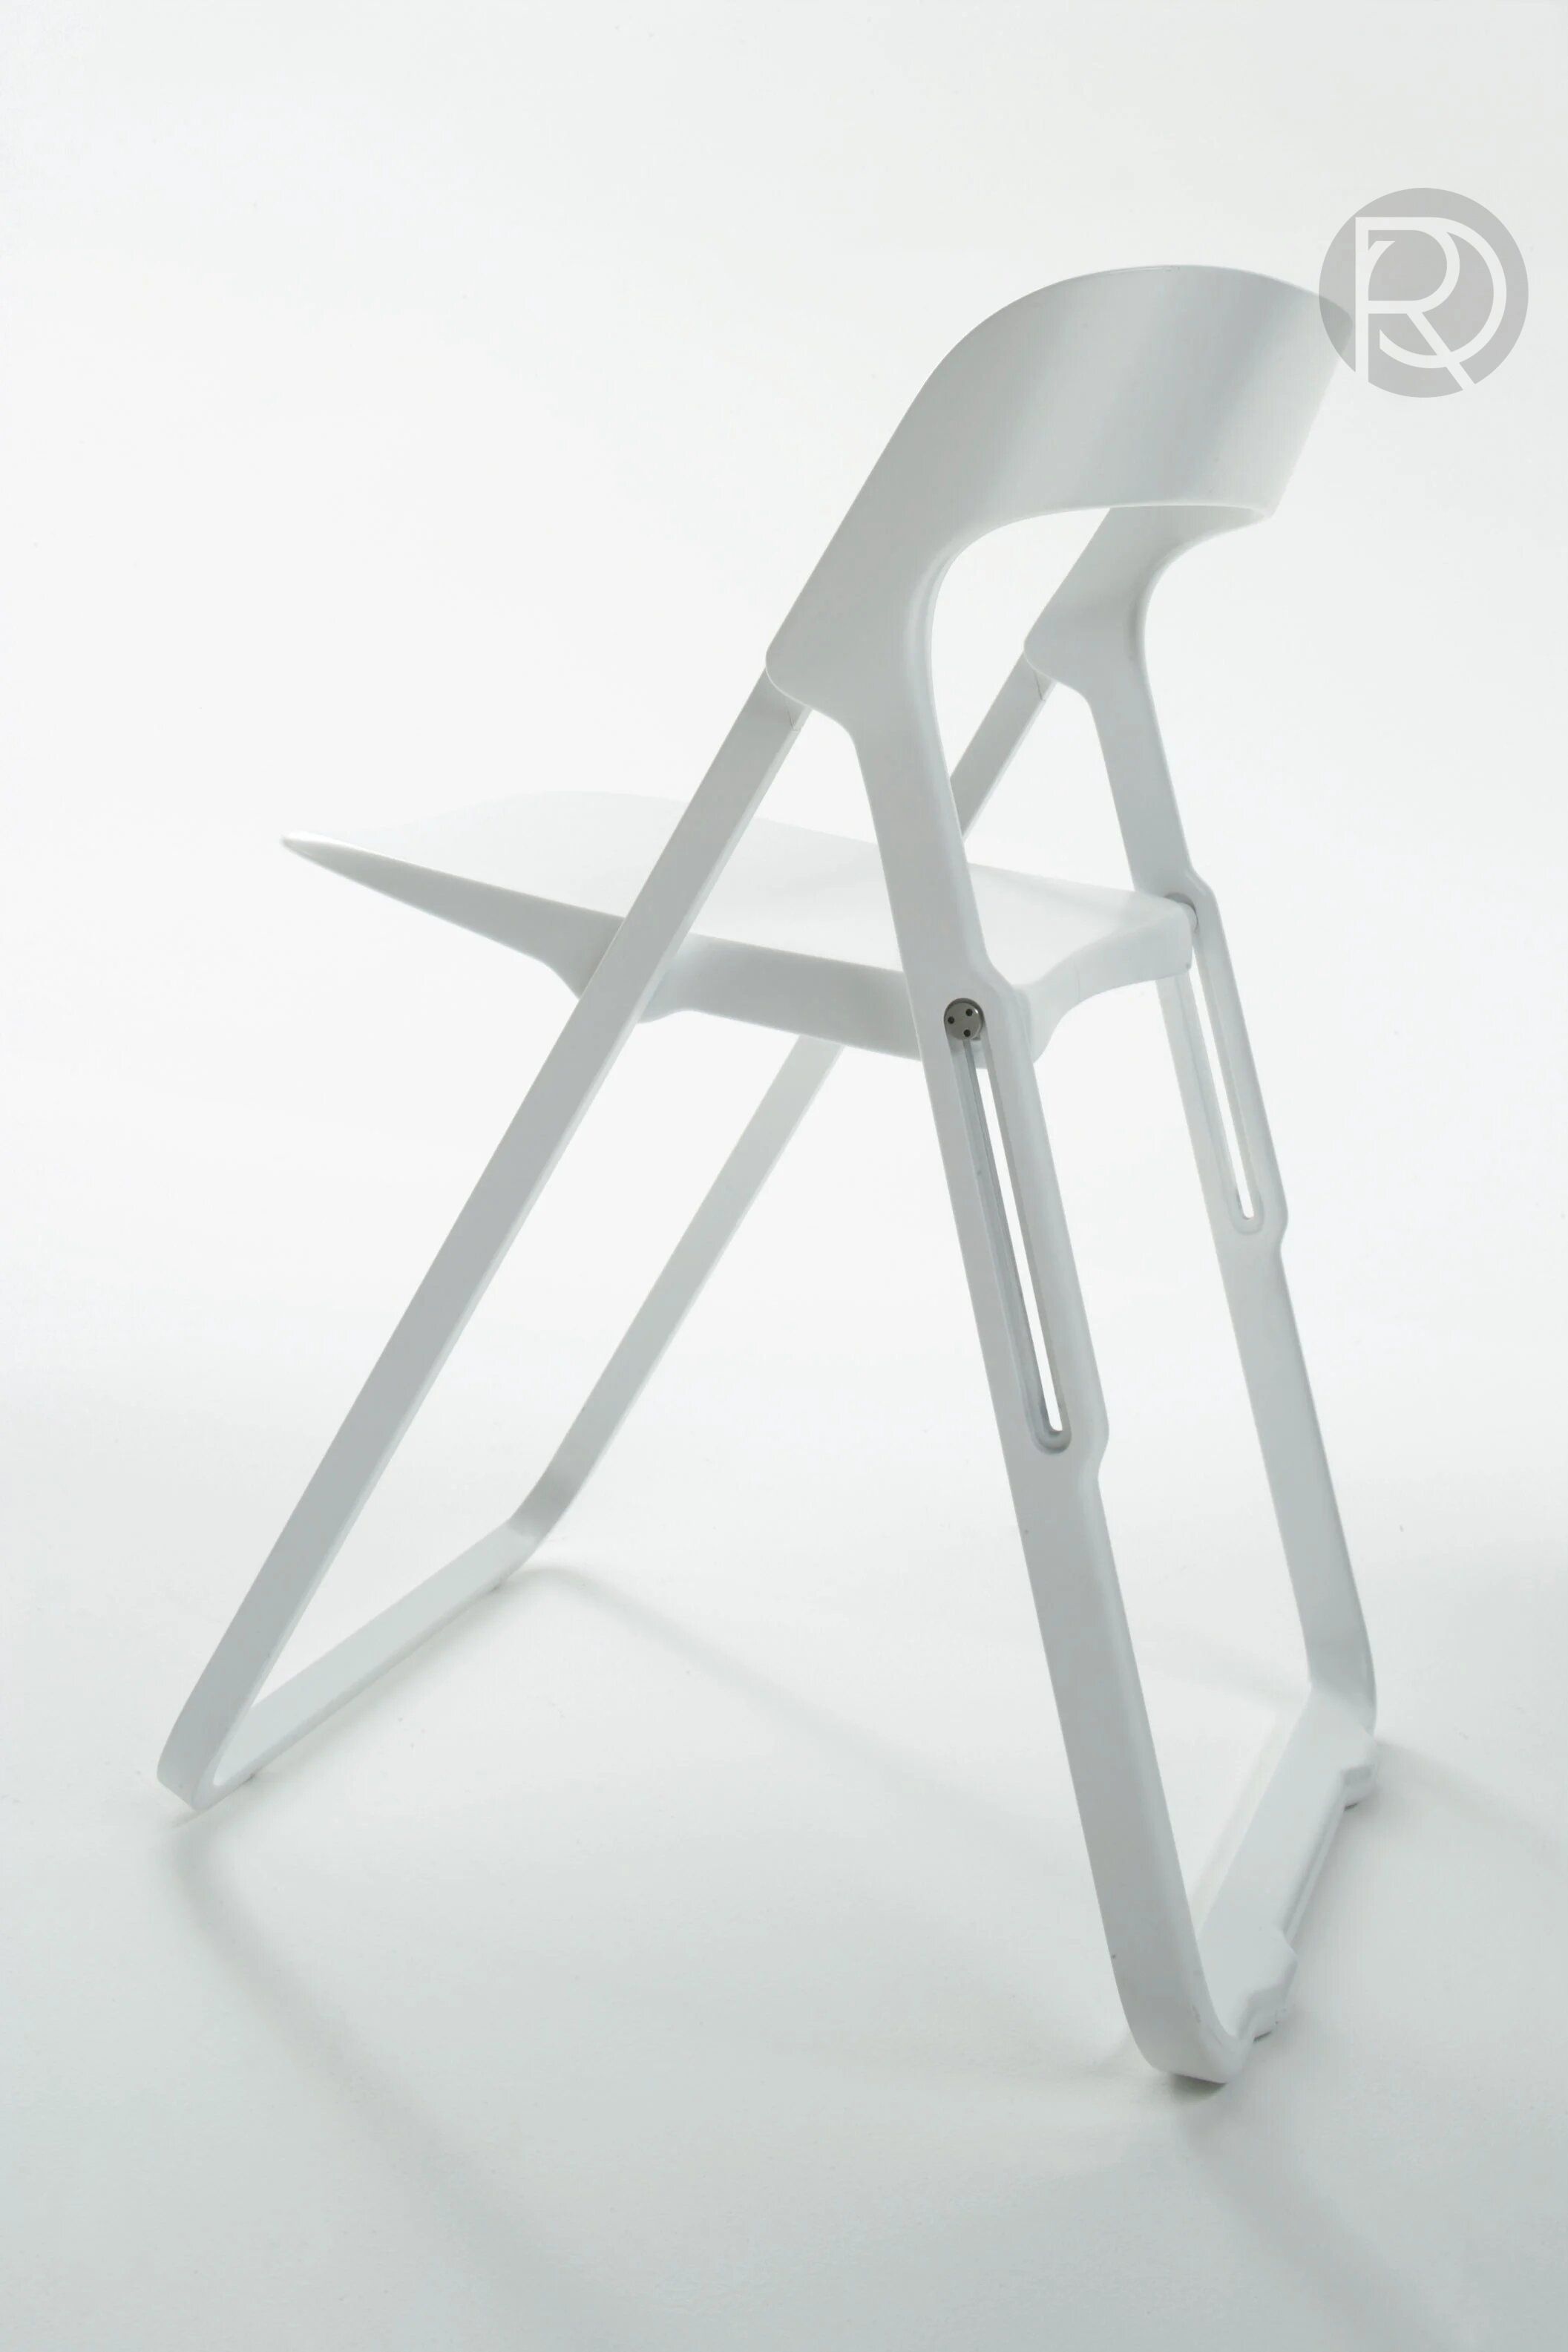 BEK chair by Casamania & Horm